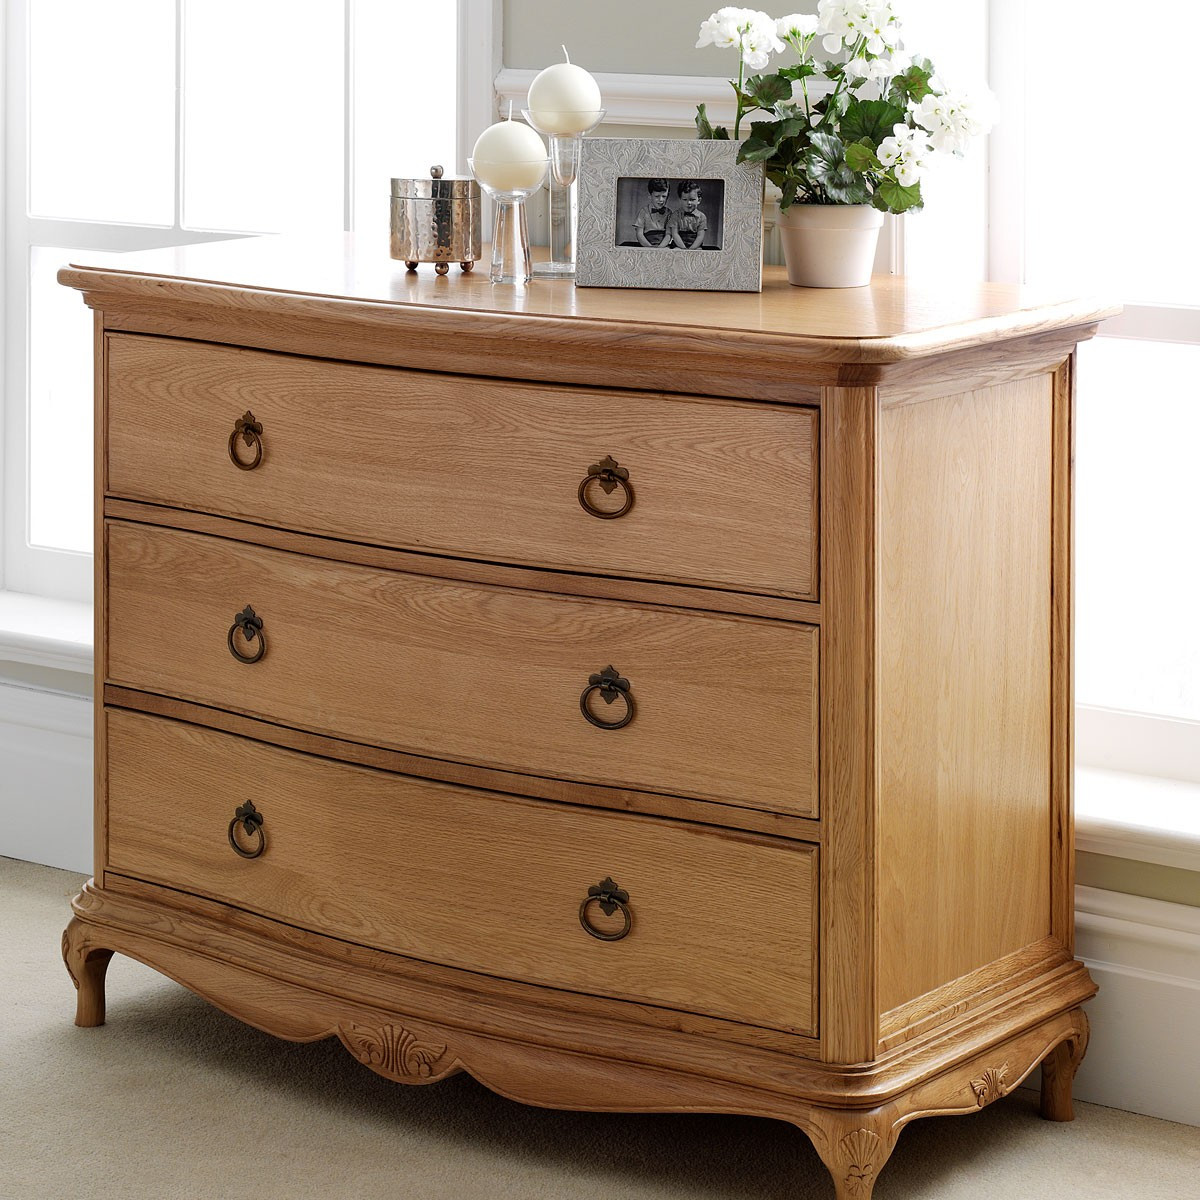 Small Bedroom Chest
 Charlotte French Inspired Oak 3 Drawer Chest